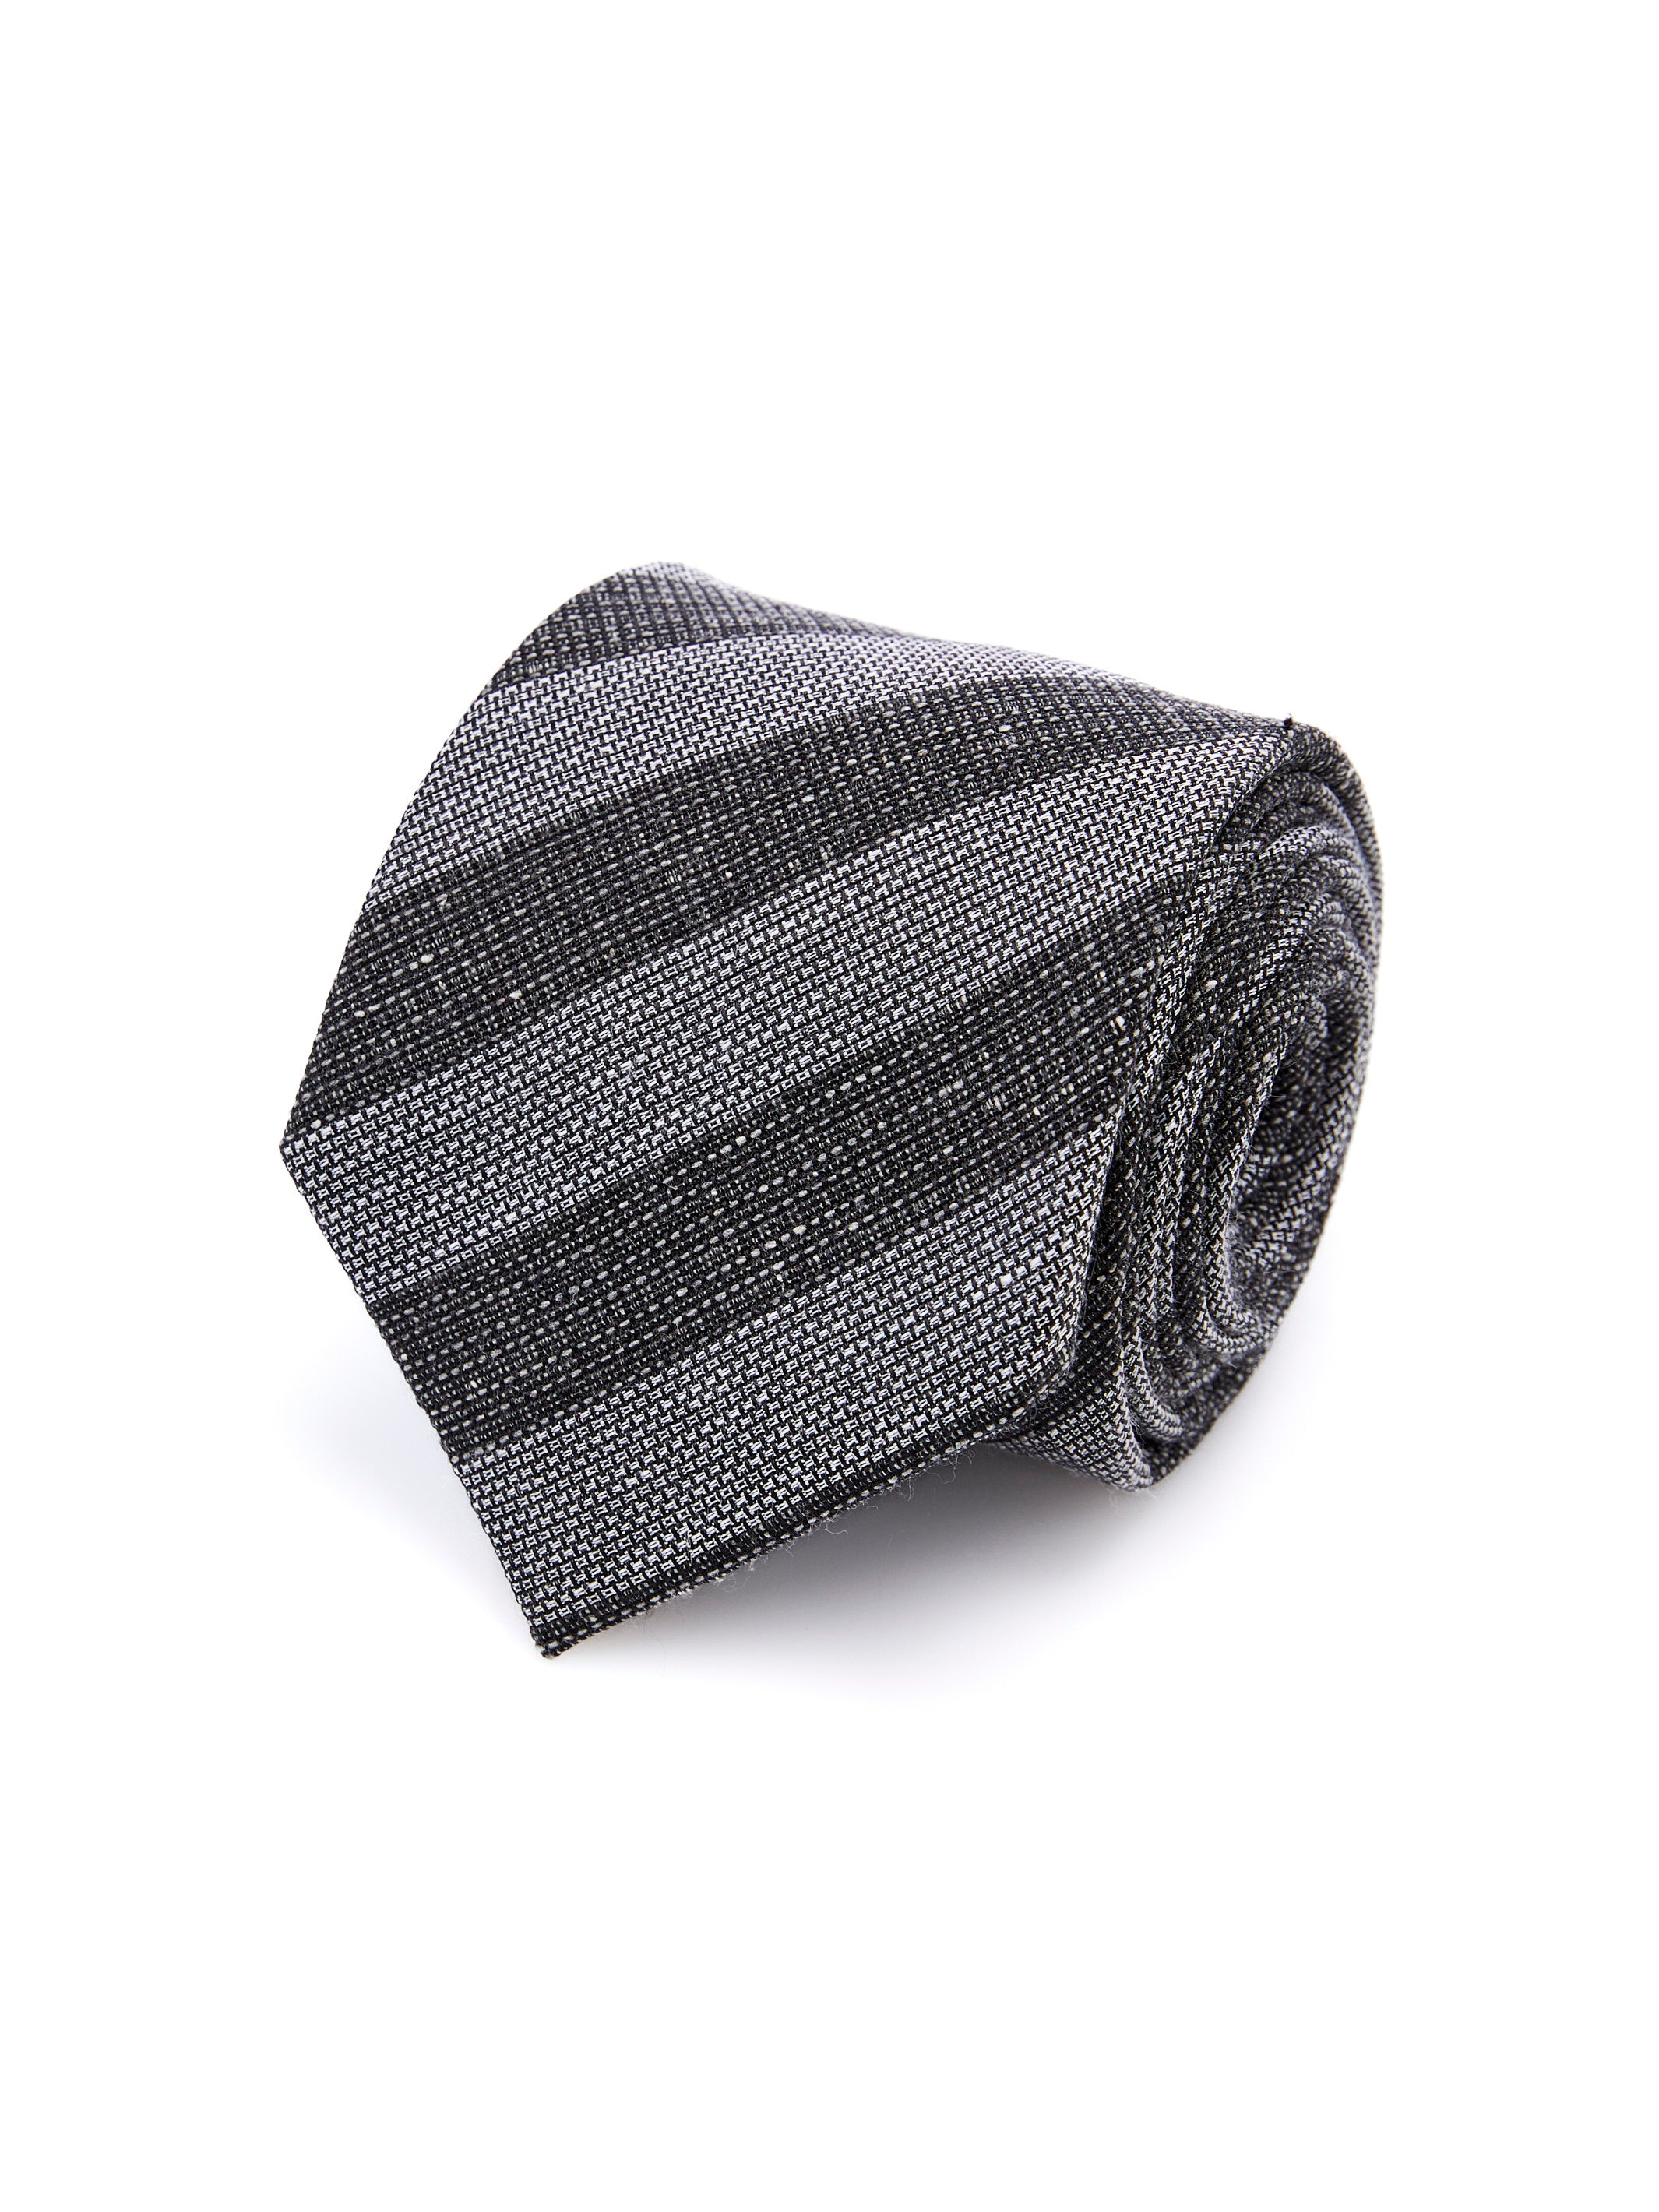 Gray tie with wide stripes